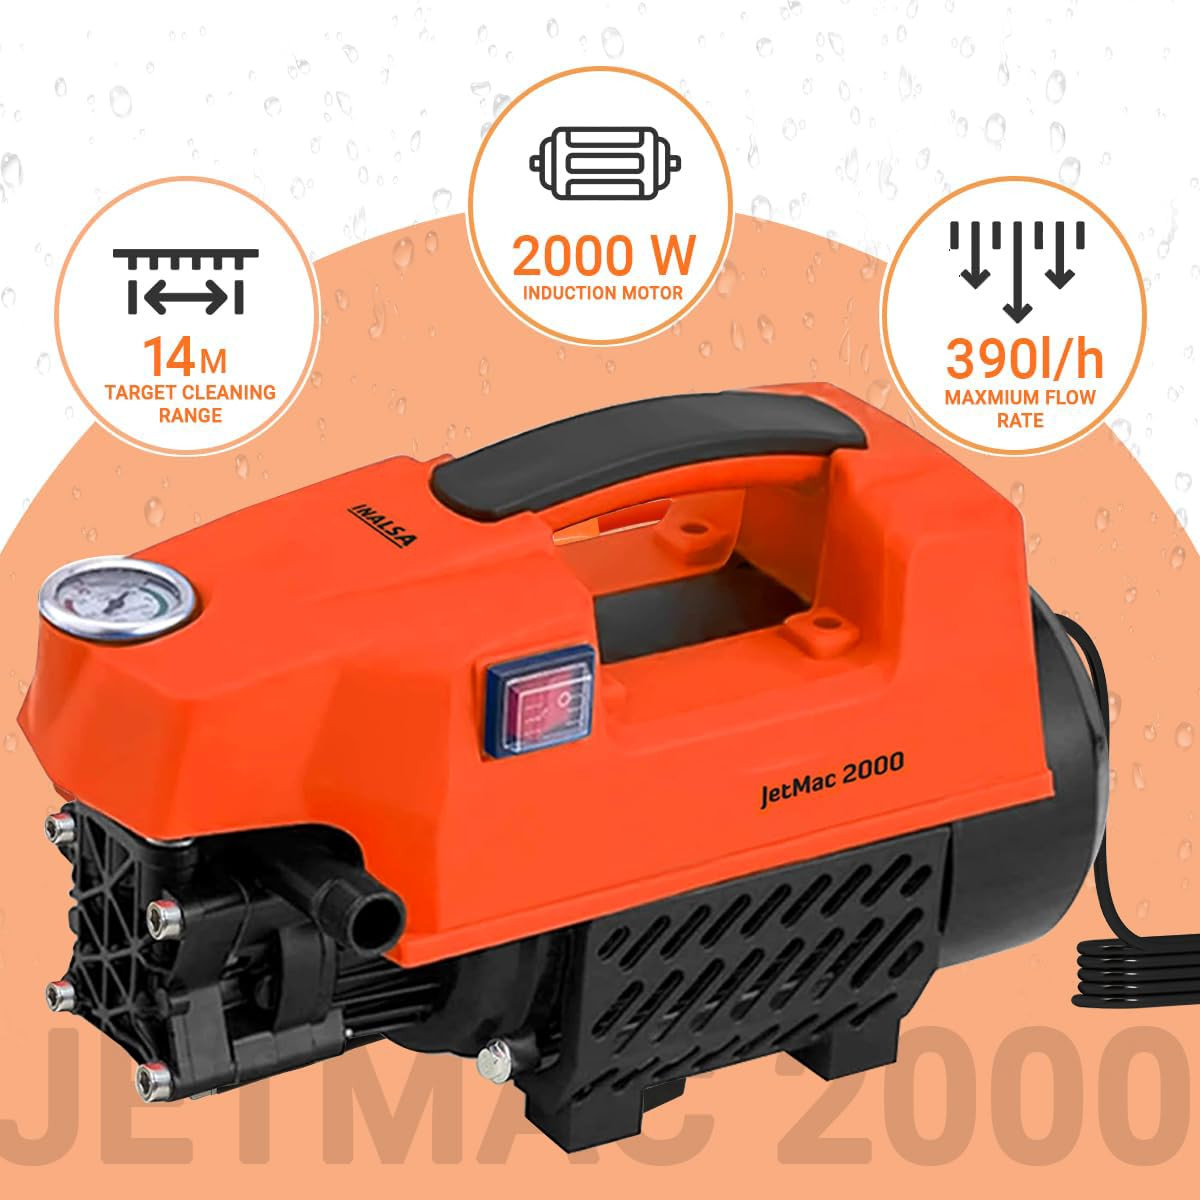 INALSA Car Washer High Pressure Washer 2000W With Induction MotorPressure-135 Bar Max Flow-390 L Hr8 Meters Outlet HoseSelf Priming  Over Heat FeaturesCar Washer High Pressure PumpJETMAC 2000